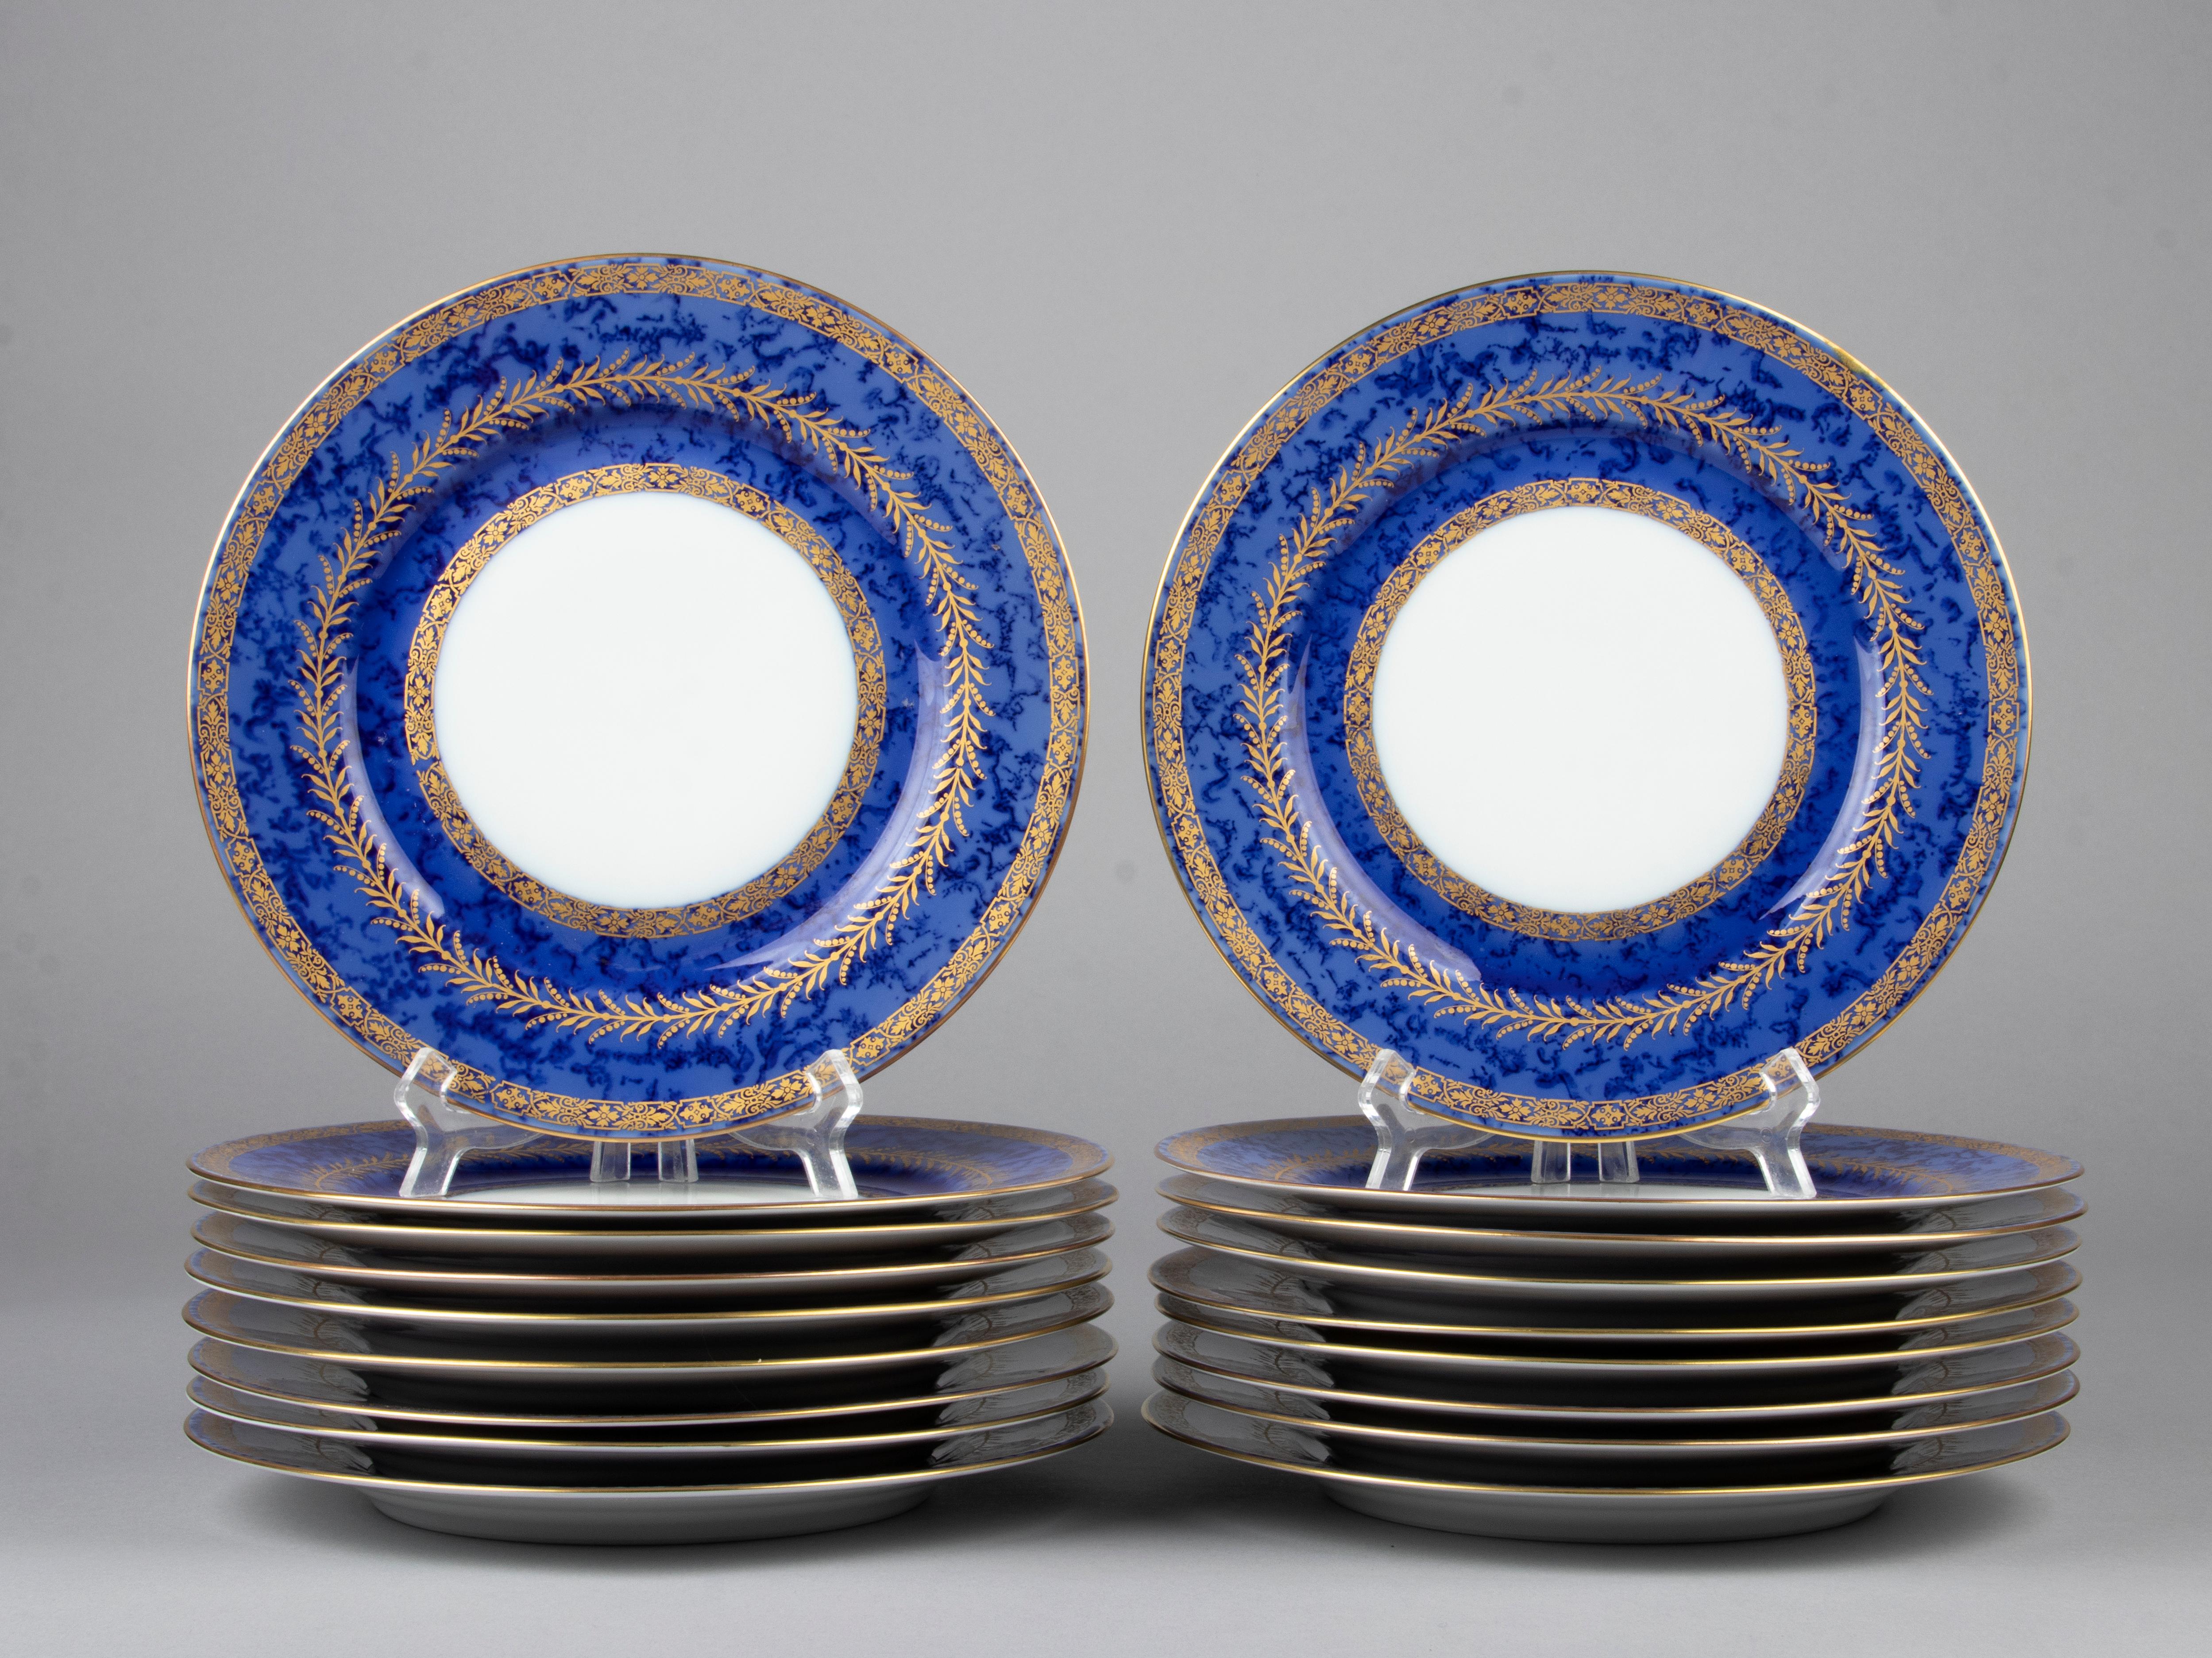 Beautiful set of 18 porcelain dinner plates by the French brand Raynaud Limoges. The plates have a deep blue color, with a kind of cloudy pattern, decorated with gold-coloured accents. The service is made by Raynaud Limoges. On the back of the